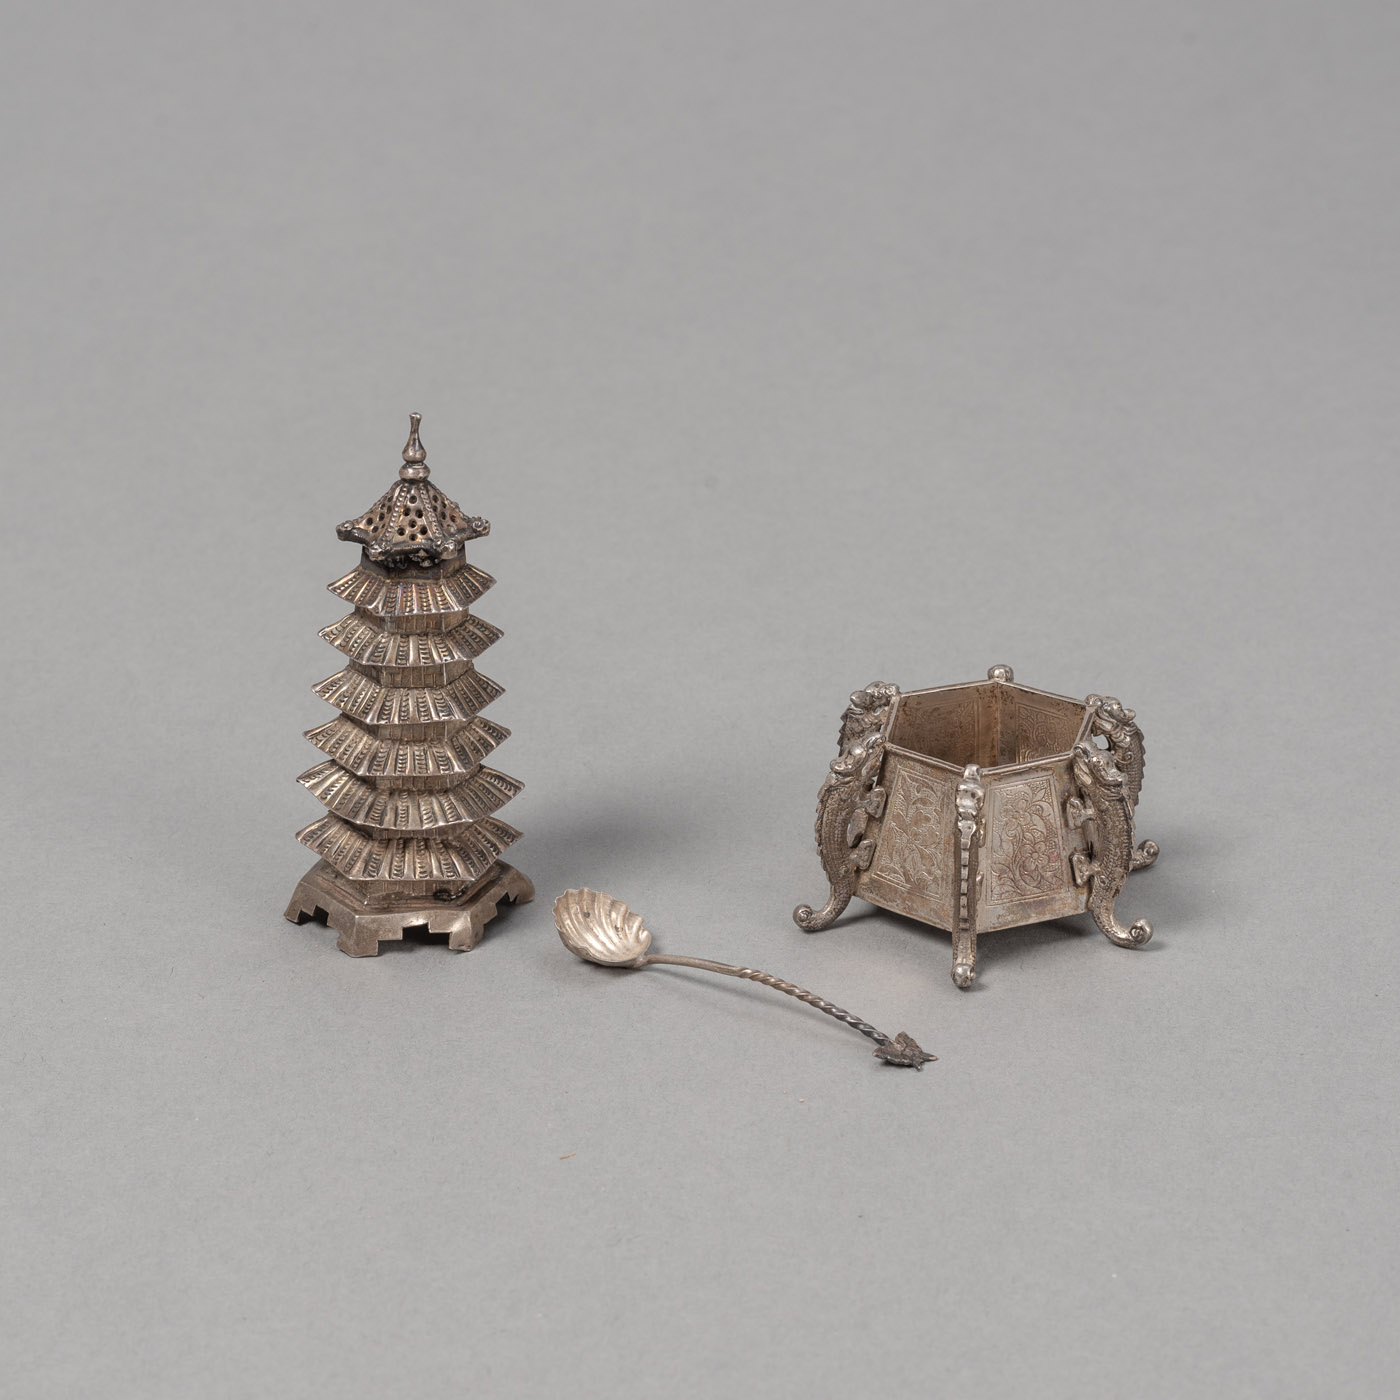 <b>A SILVER SALT SHAKER IN THE SHAPE OF A PAGODA WITH COVER AND A SMALL BOWL WITH A SPOON</b>